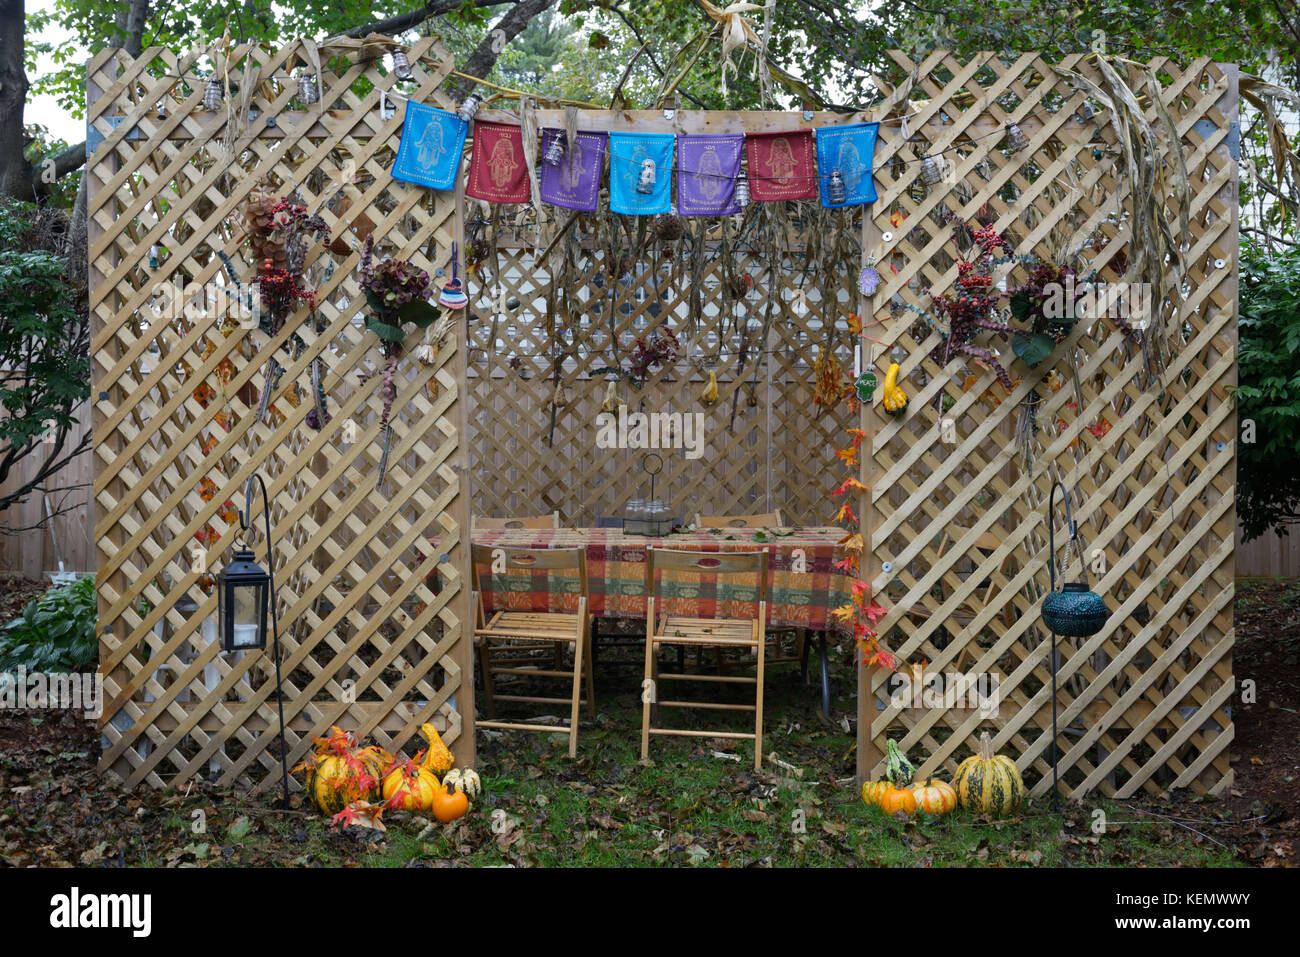 Jewish sukkah, a temporary structure for gathering in during the autumn harvest festival Sukkot Stock Photo